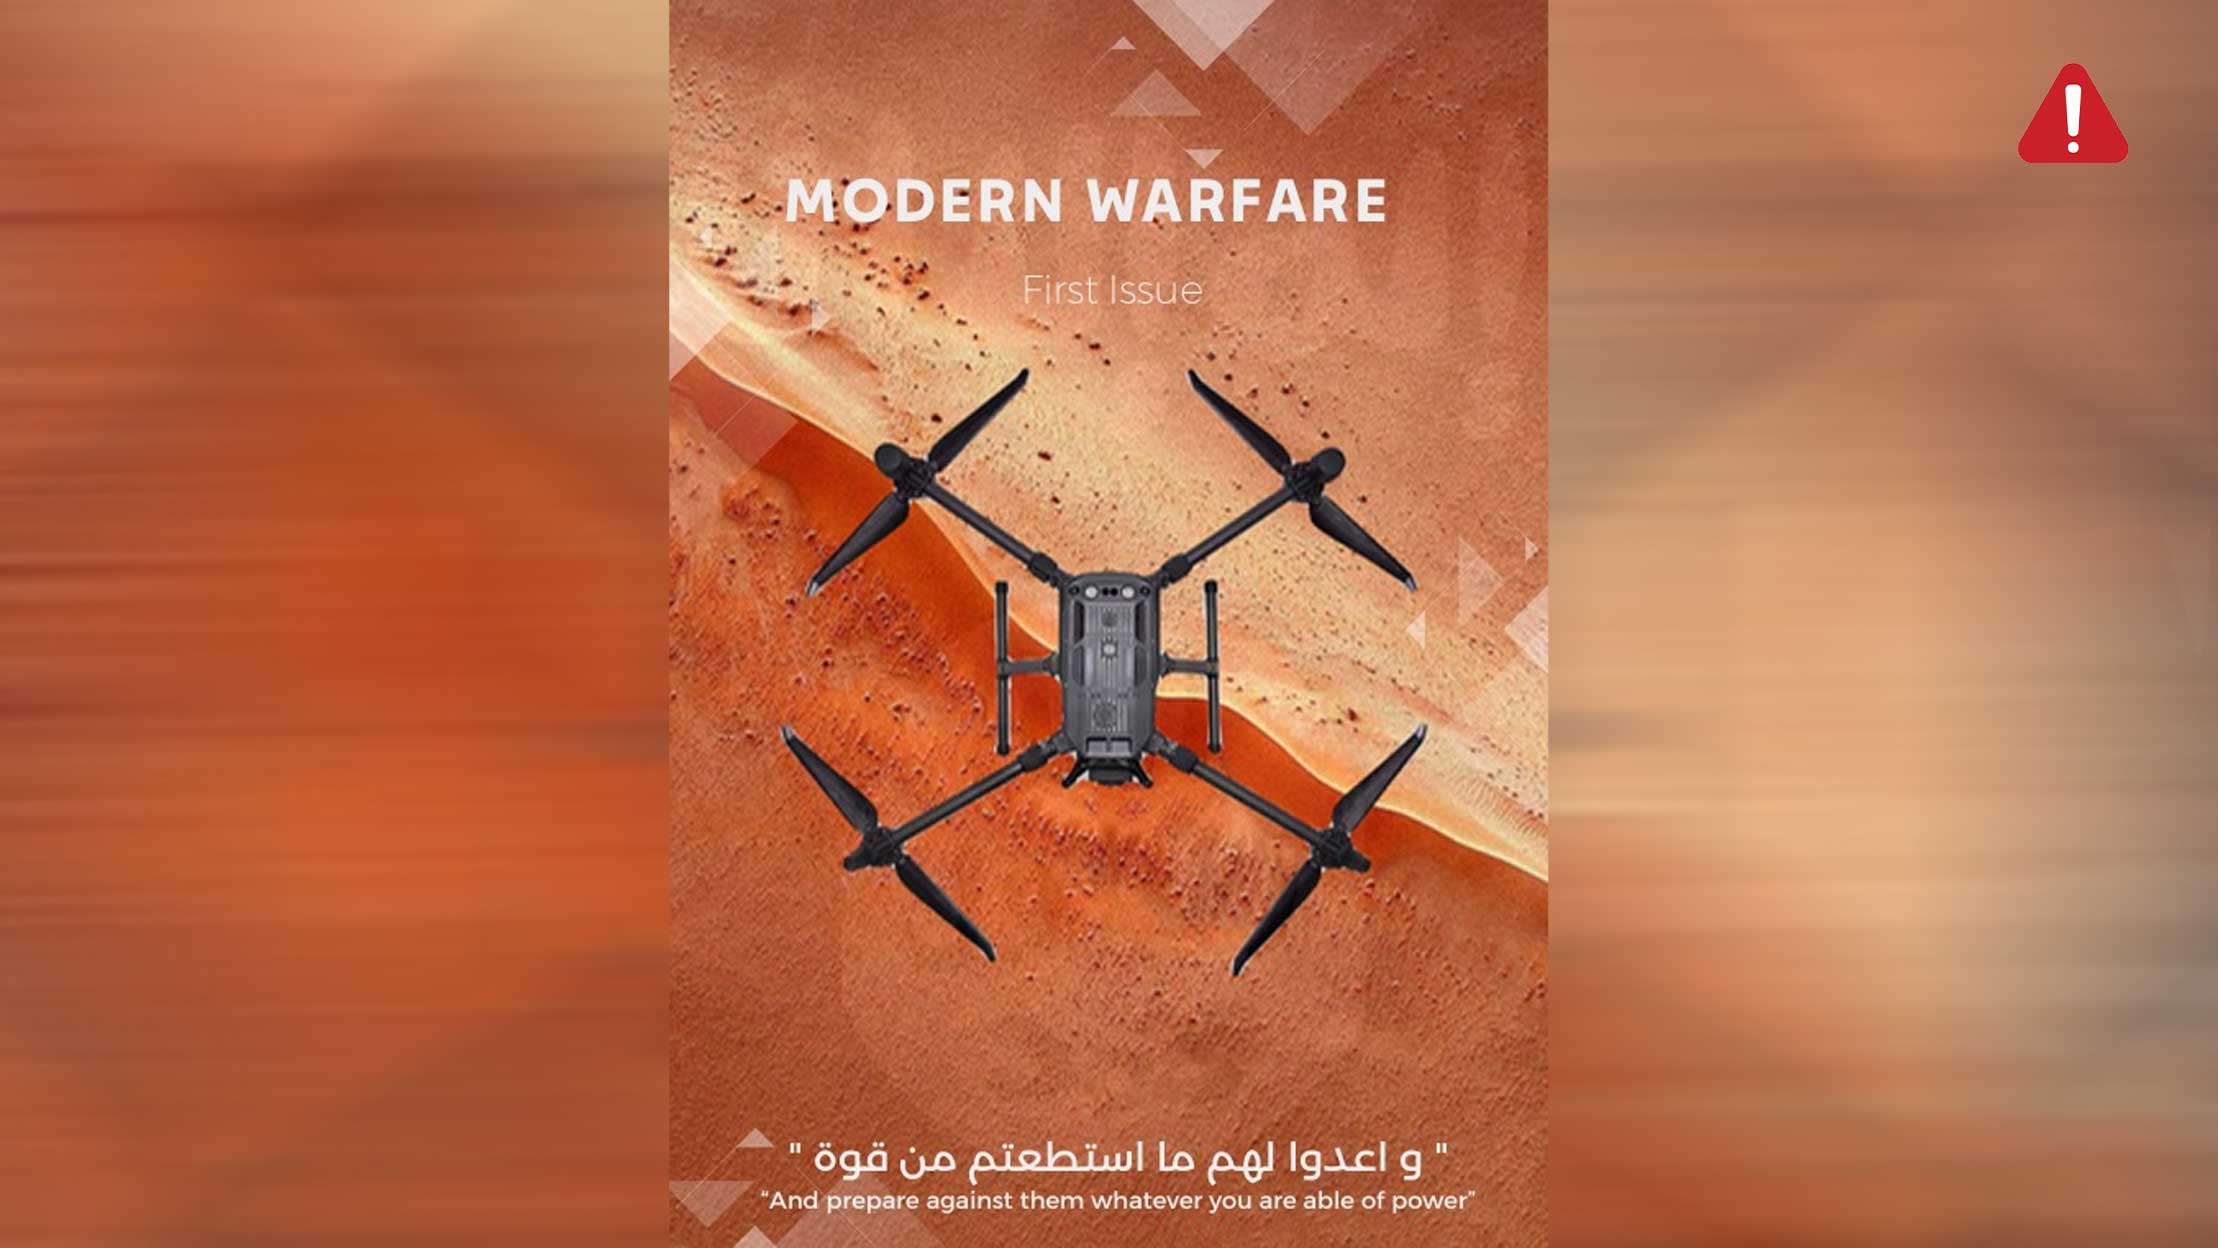 TKD MONITORING: Islamic State Supporters Launch New Magazine Focused on Drone Warfare